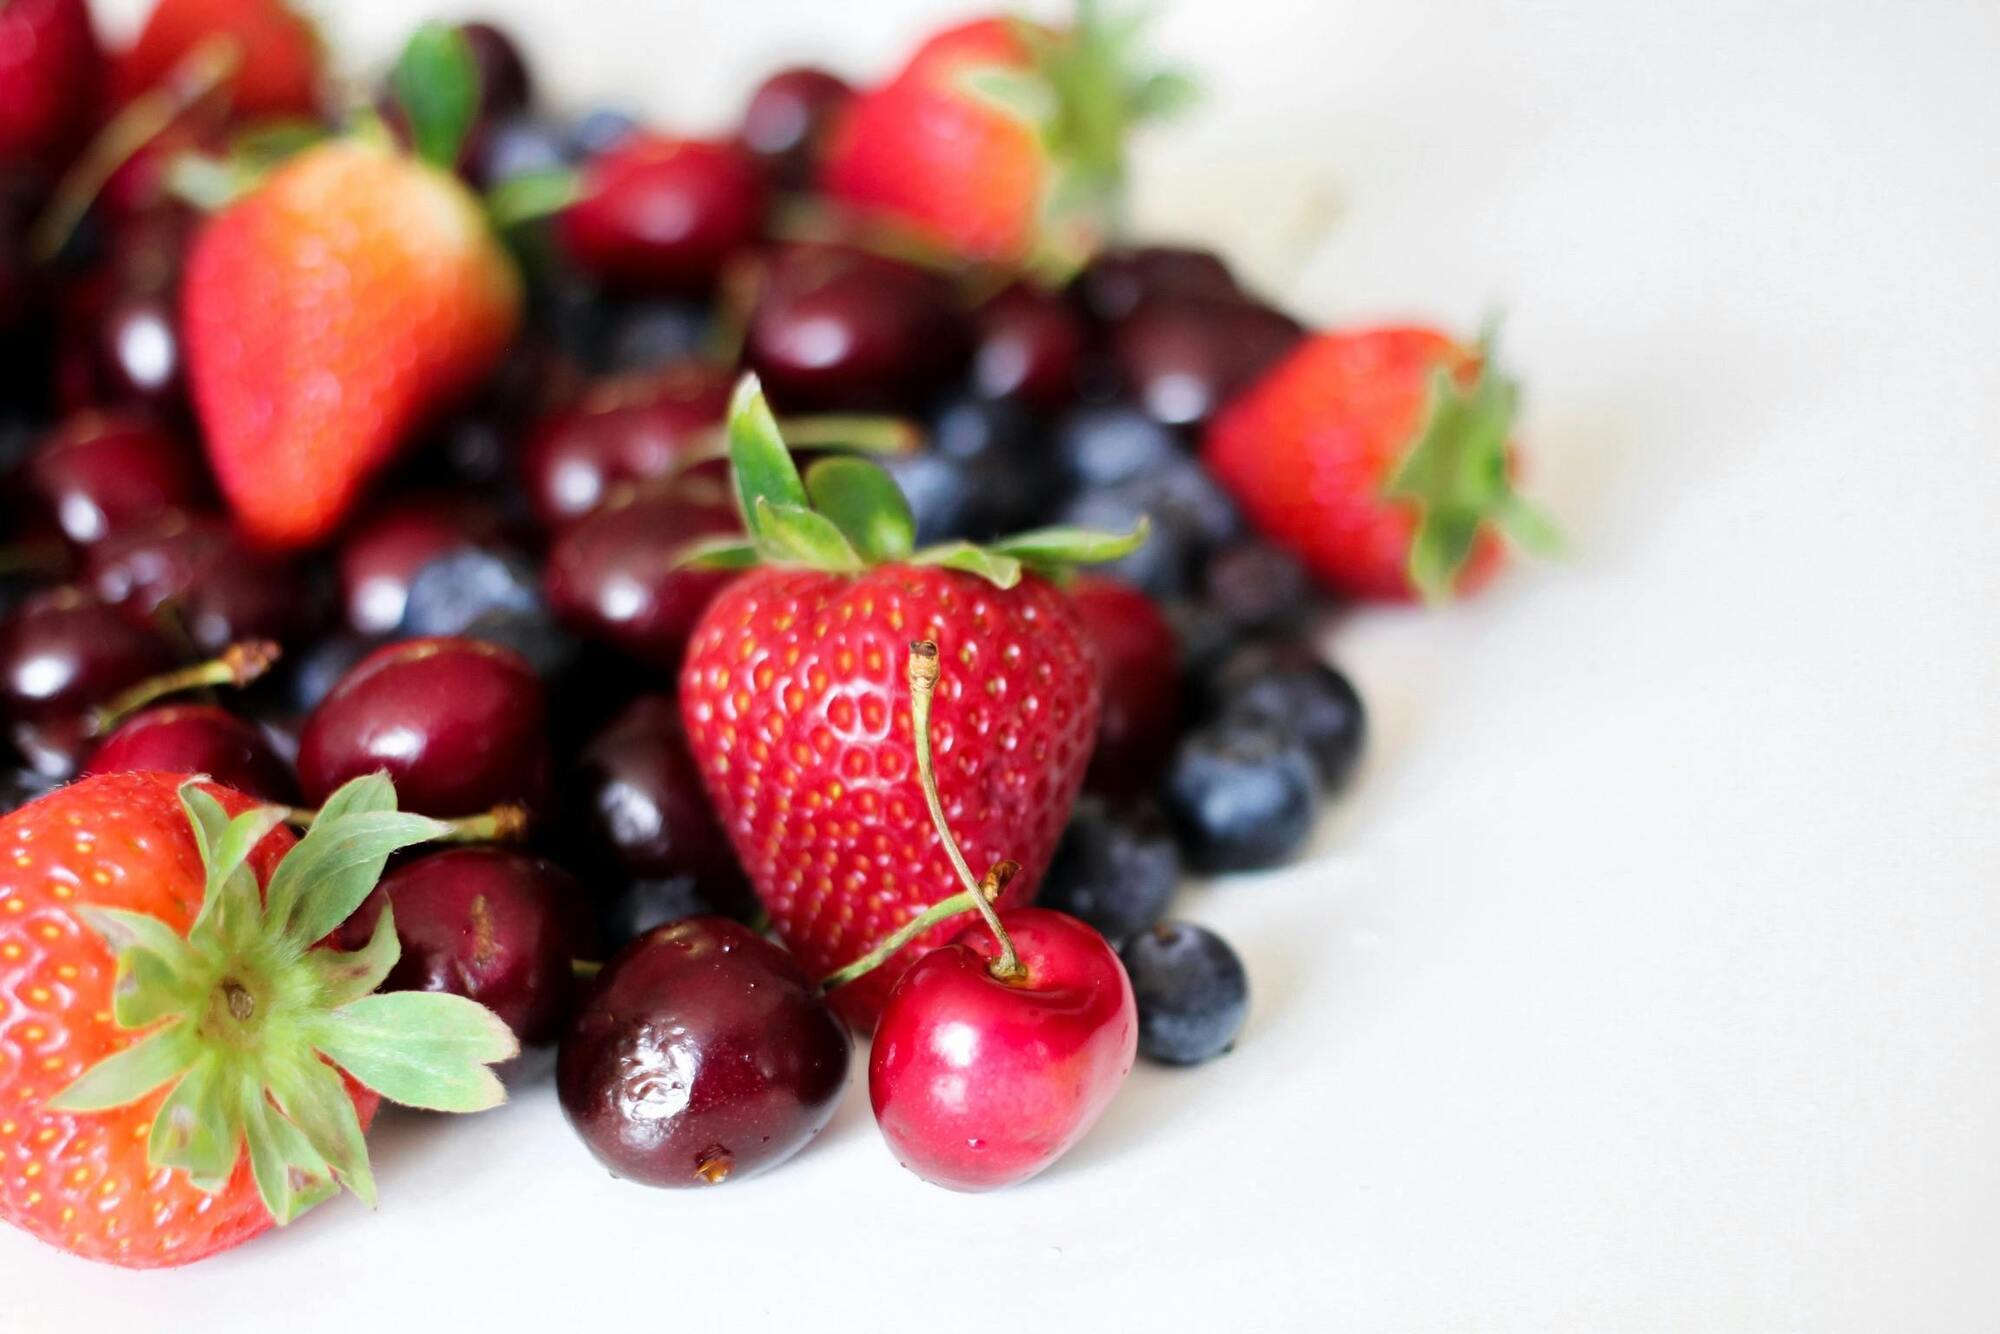 How to wash berries properly and why use baking soda